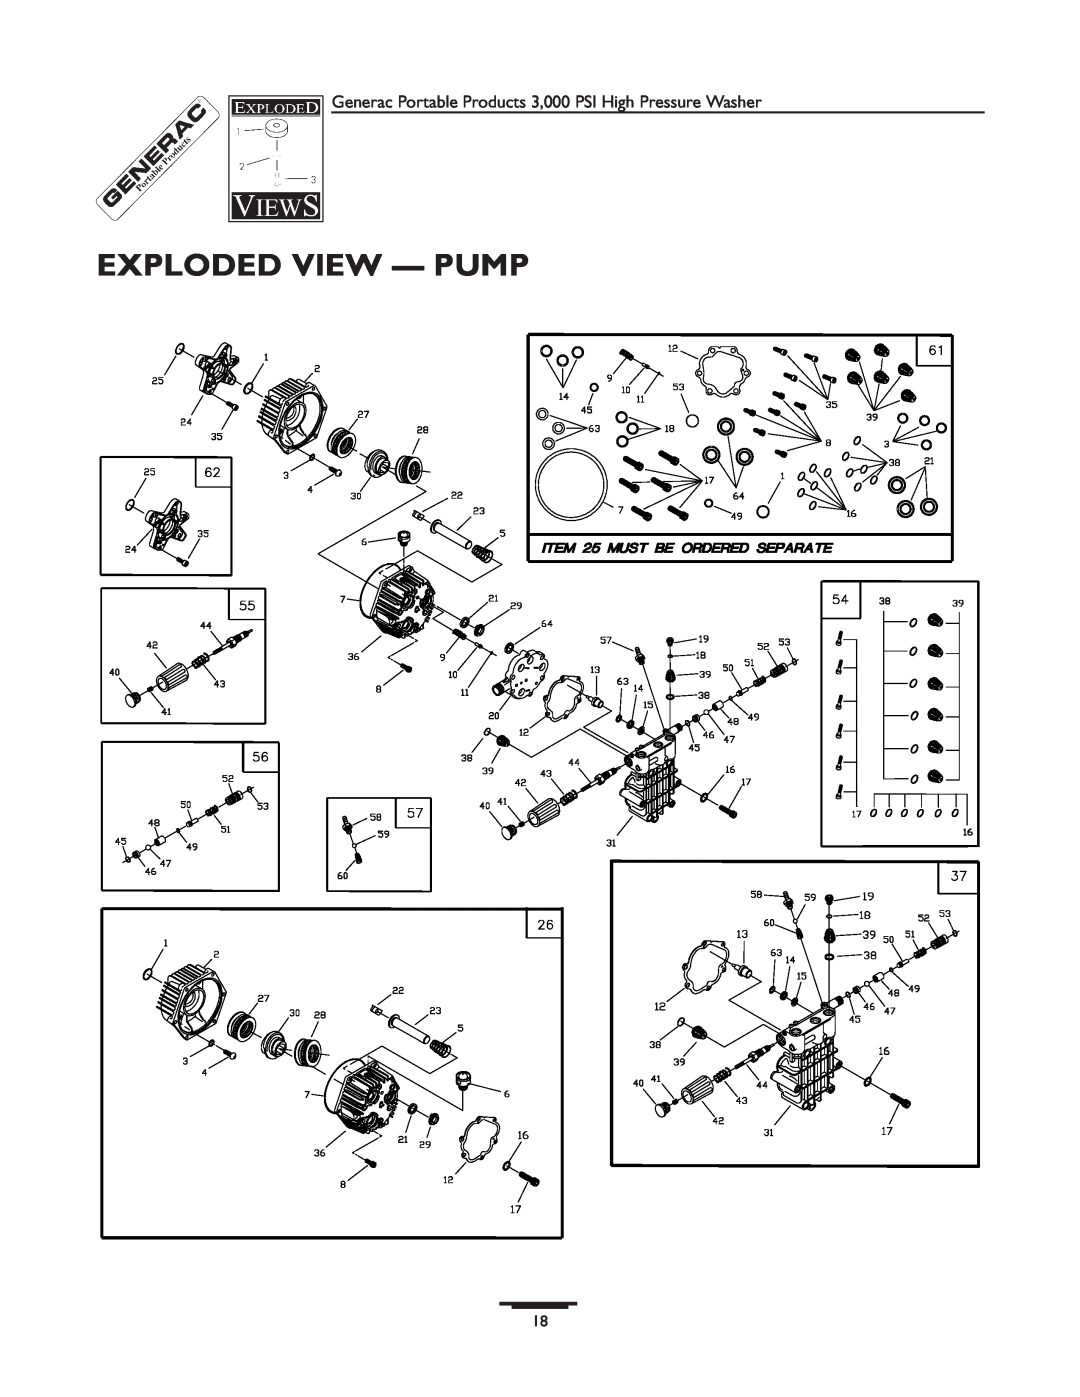 Generac 1418-0 manual Exploded View - Pump, Generac Portable Products 3,000 PSI High Pressure Washer 